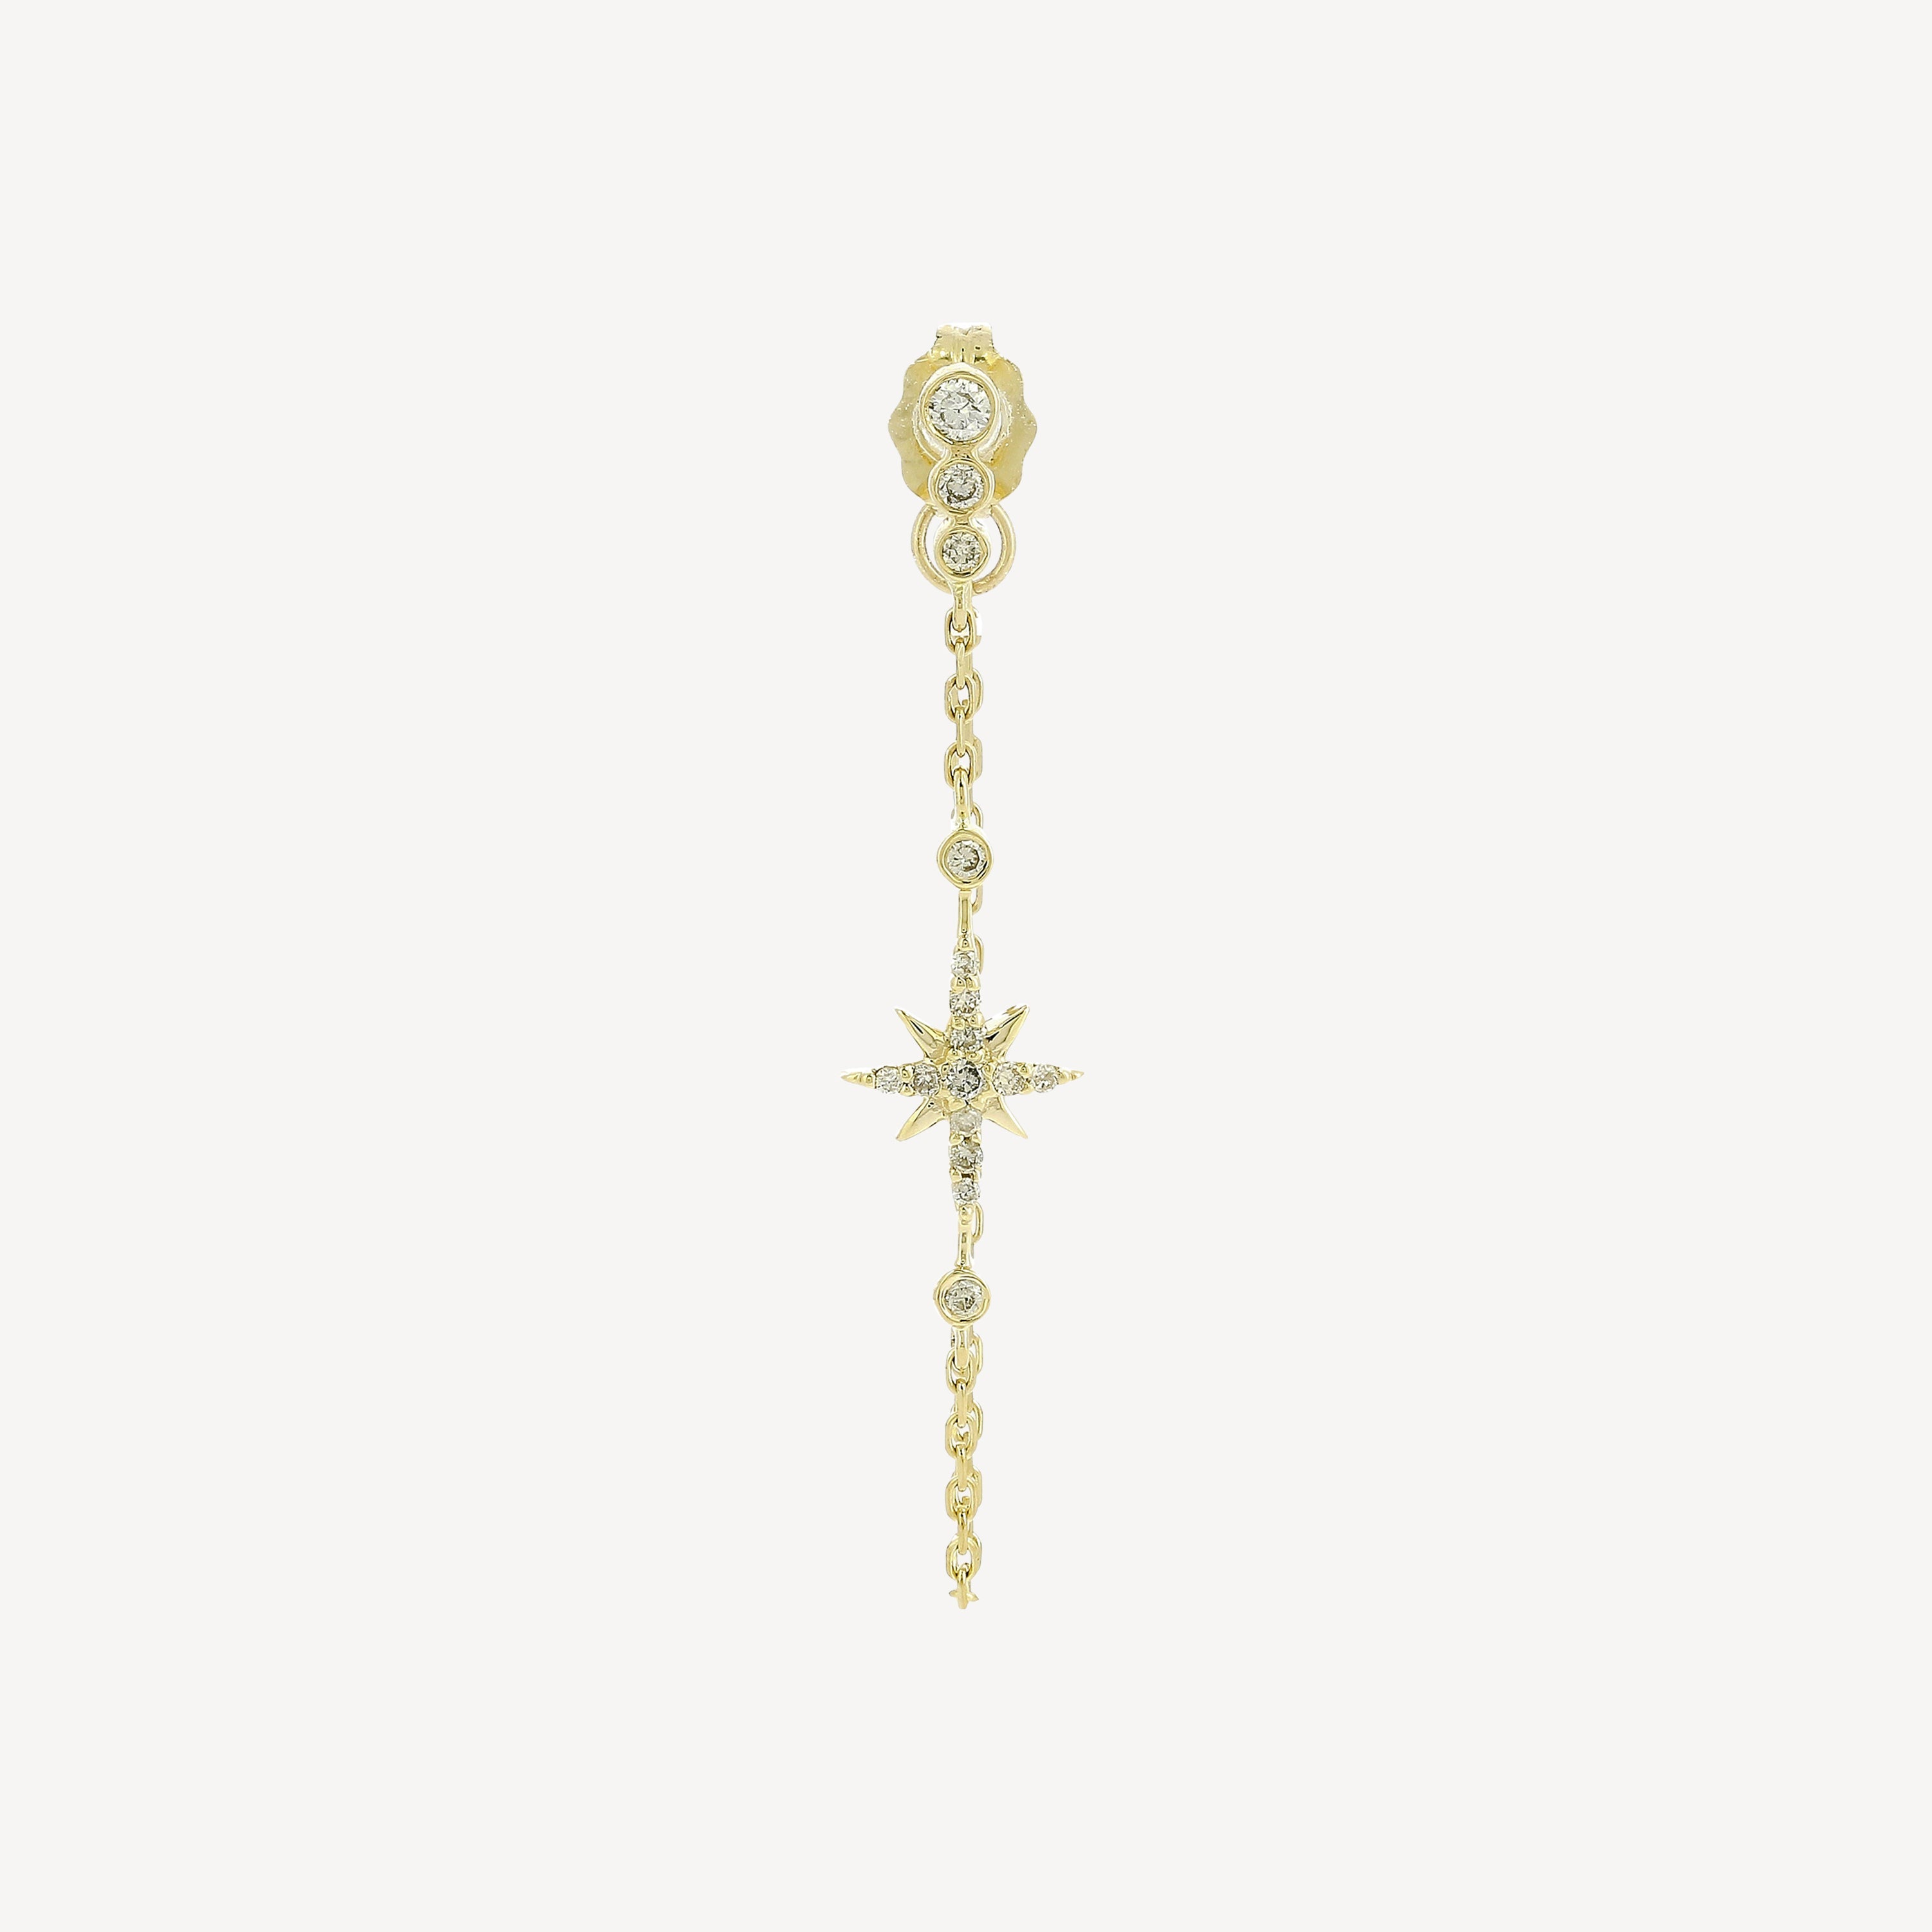 North Star and Diamonds Long Chain Earring